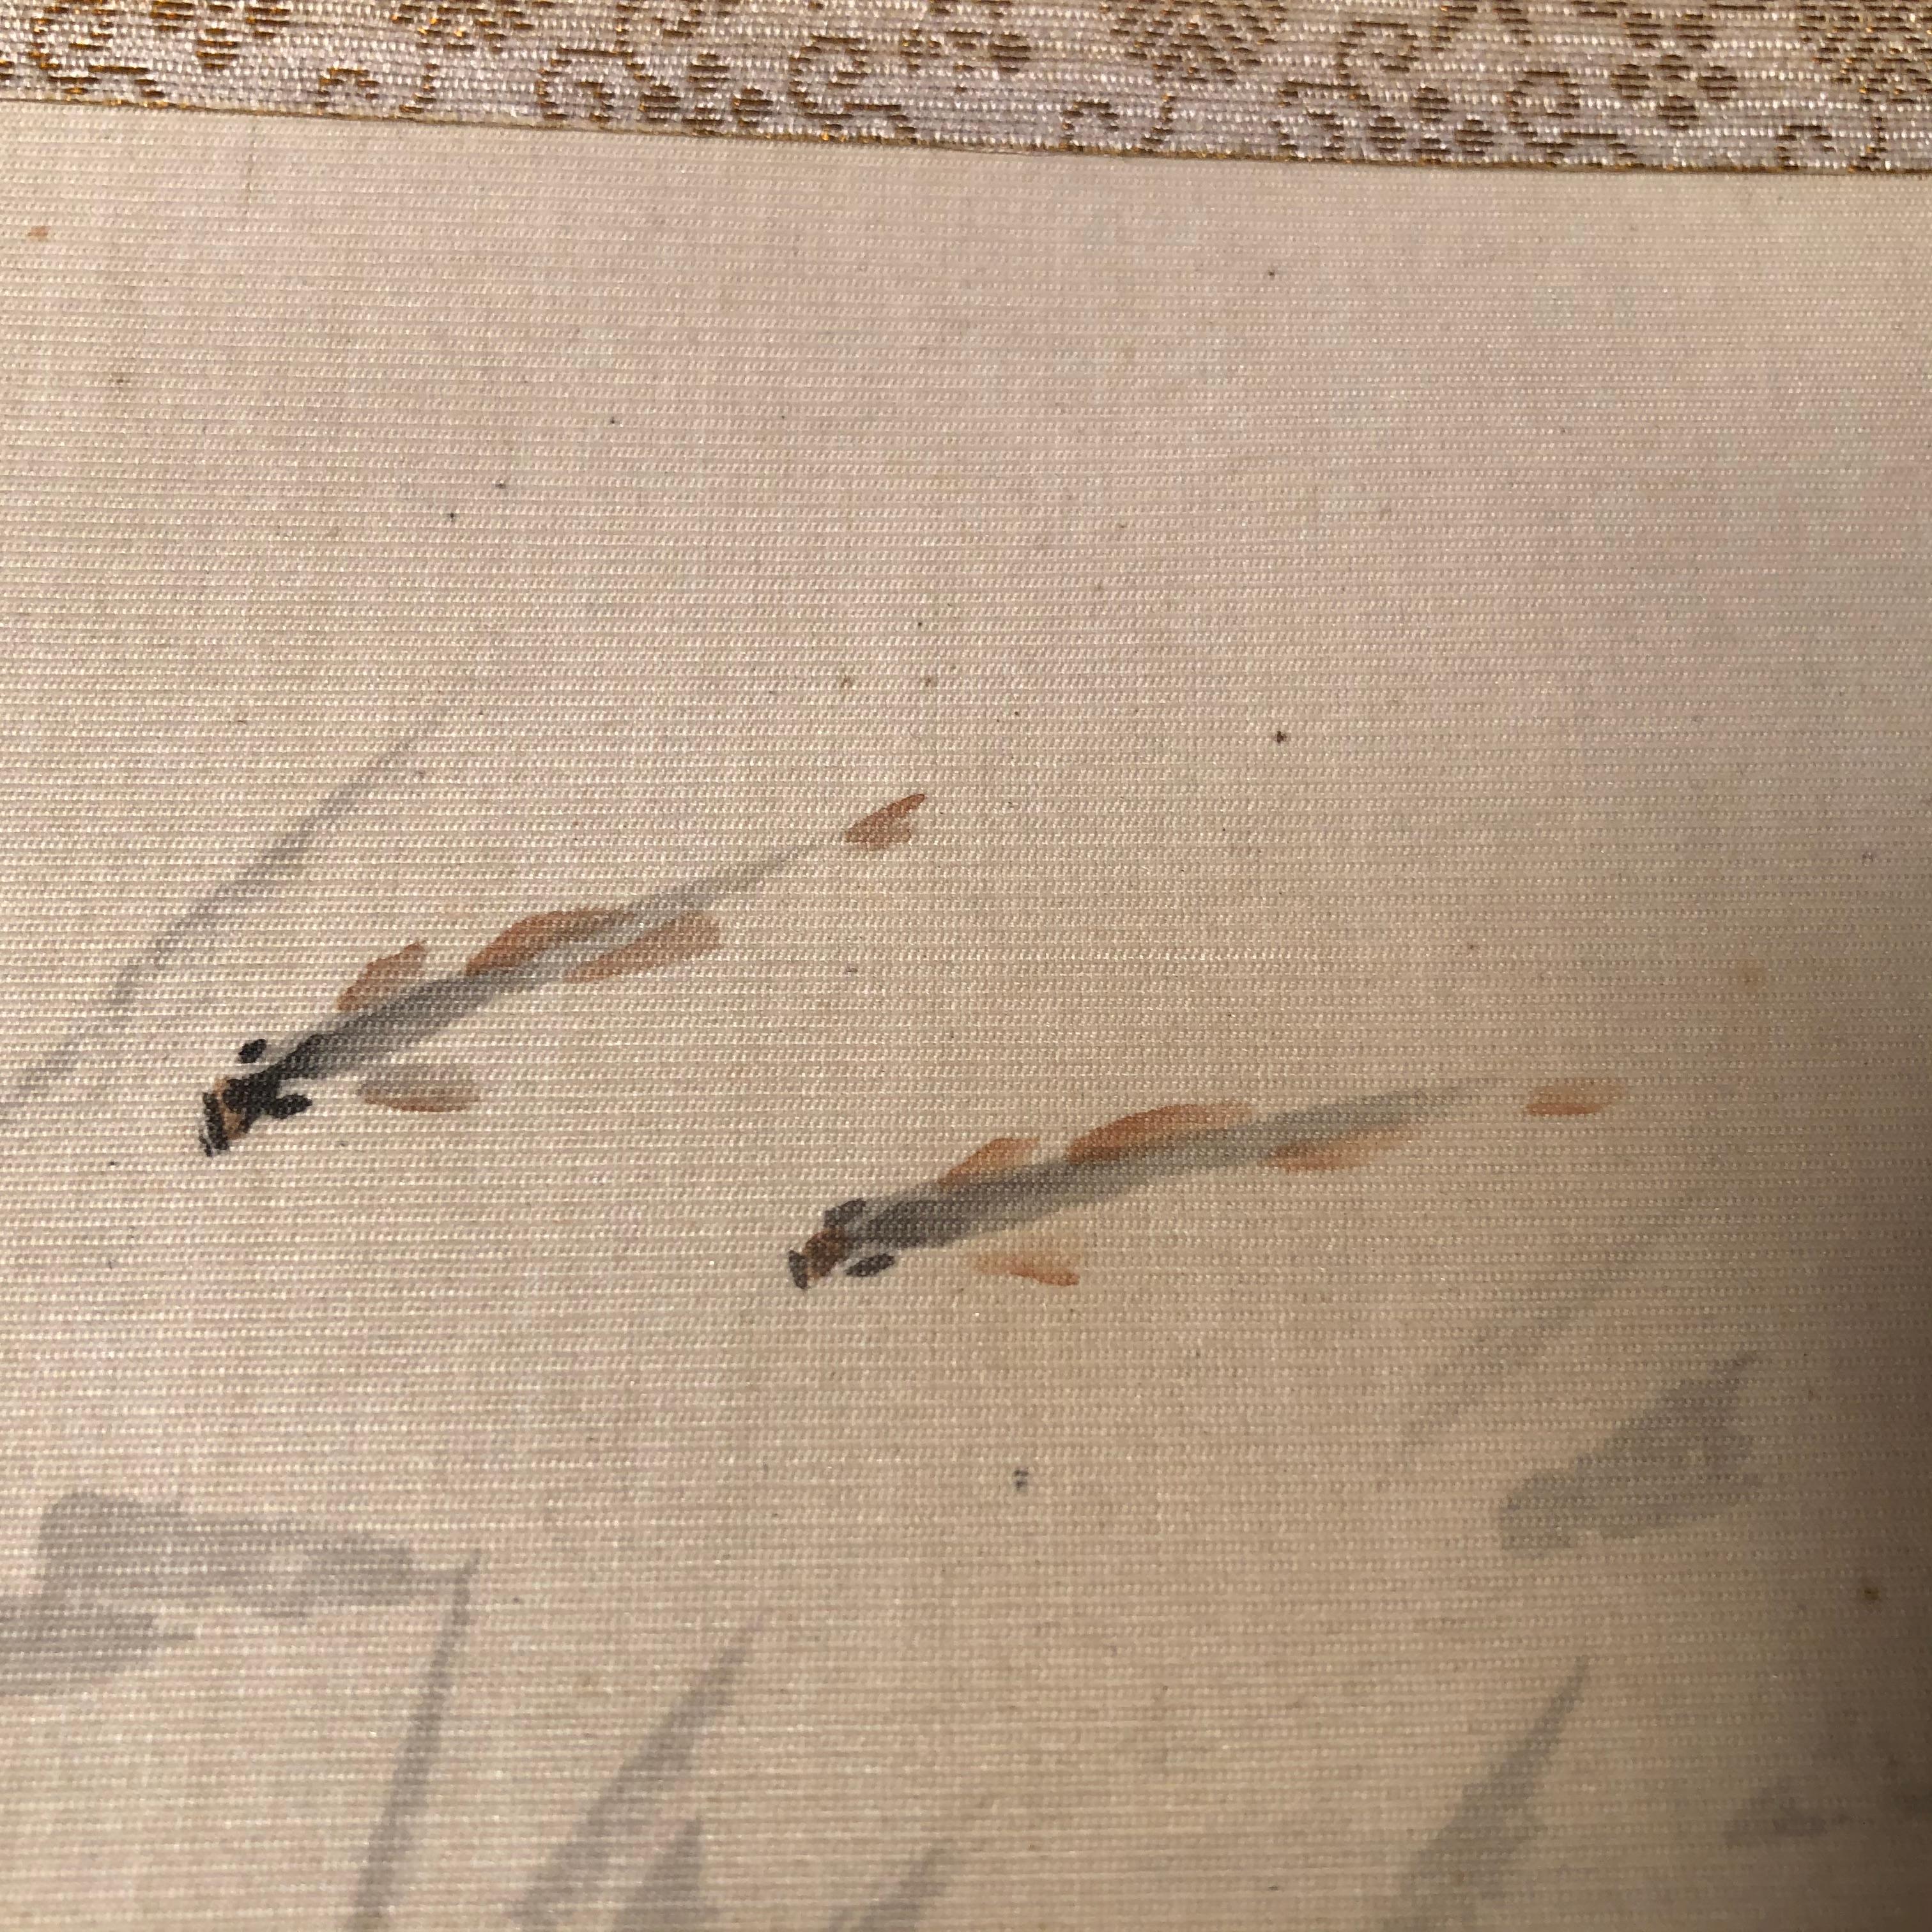 19th Century Japanese Early Scroll 